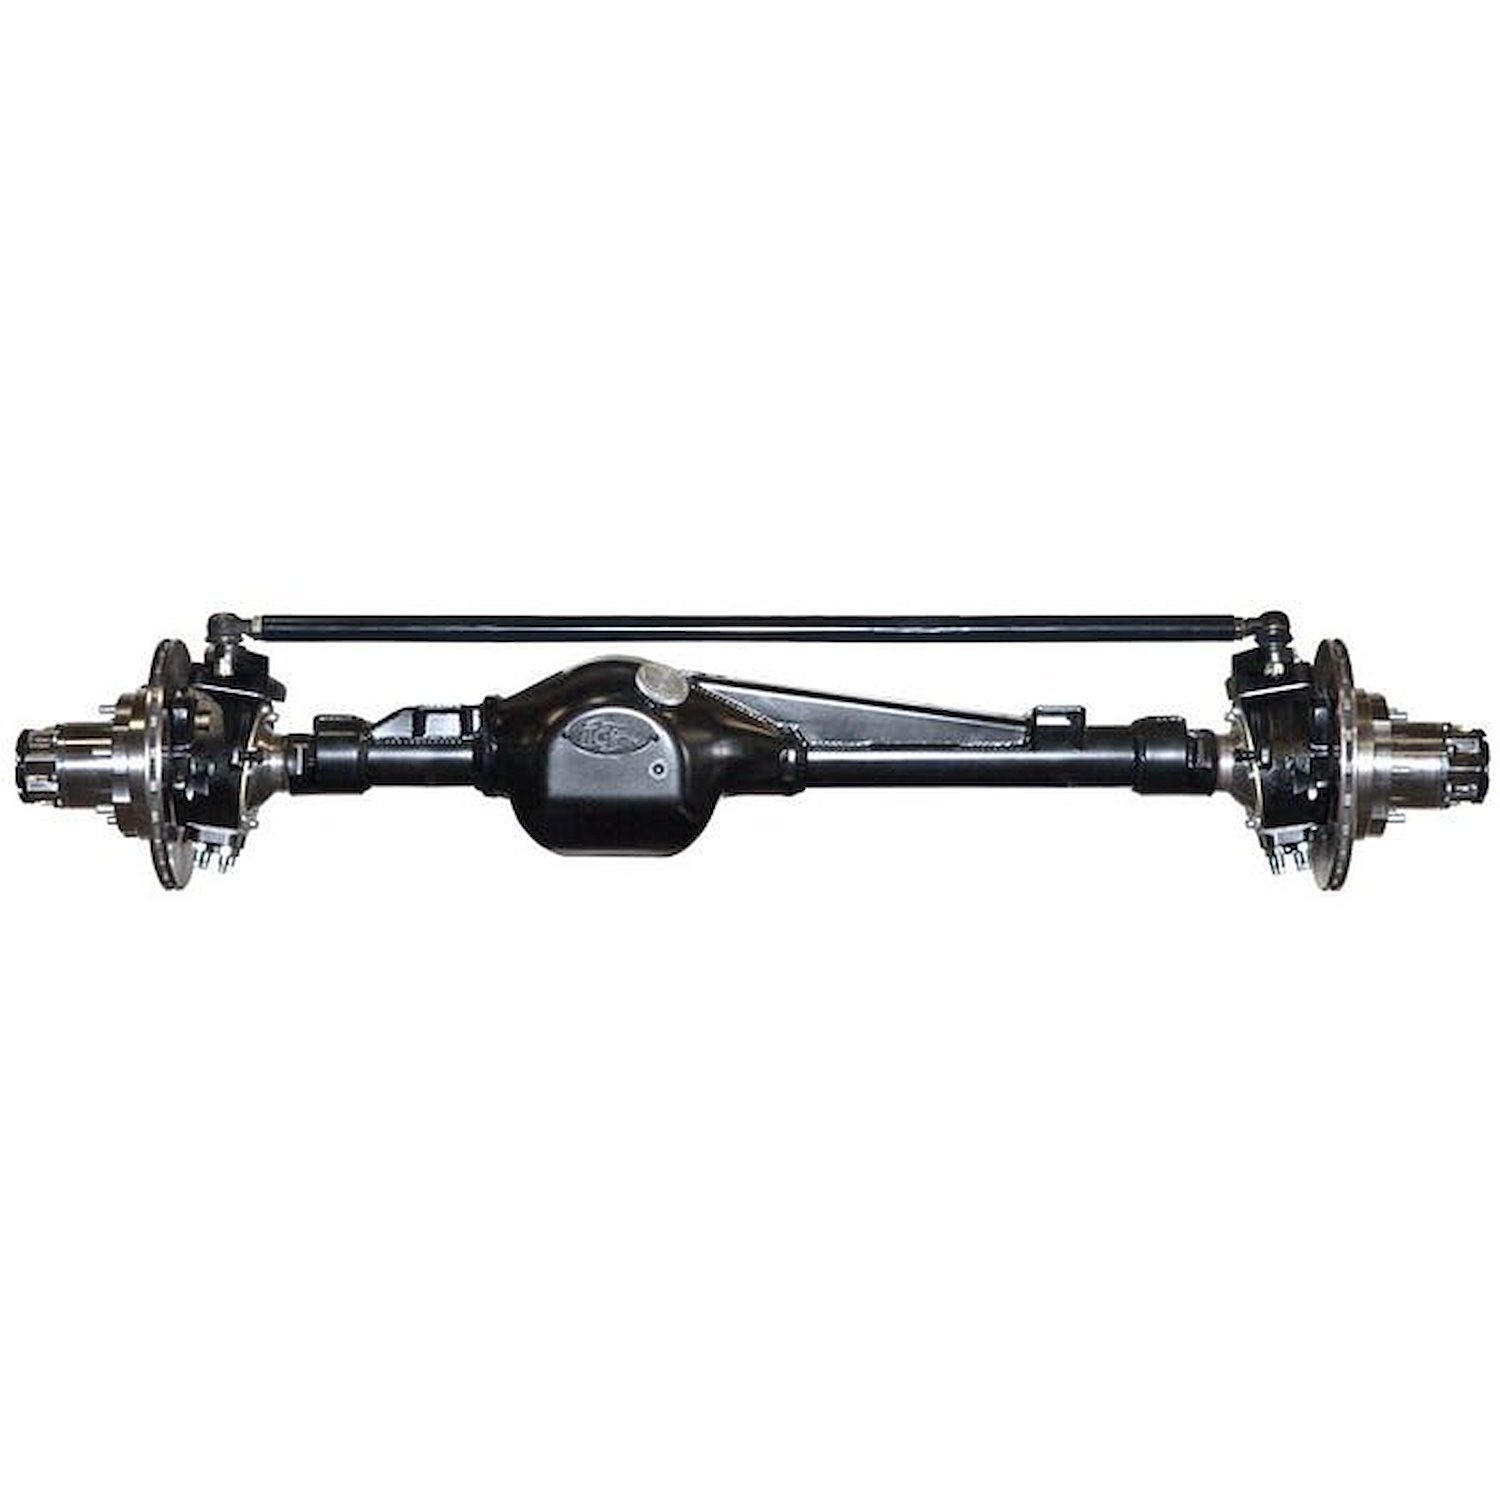 301256-1-KIT Rock Assault Fully-Built Front Axles, +3 Width LHD High-Pinion 5.29 Detroit Creeper Flanges Toyota